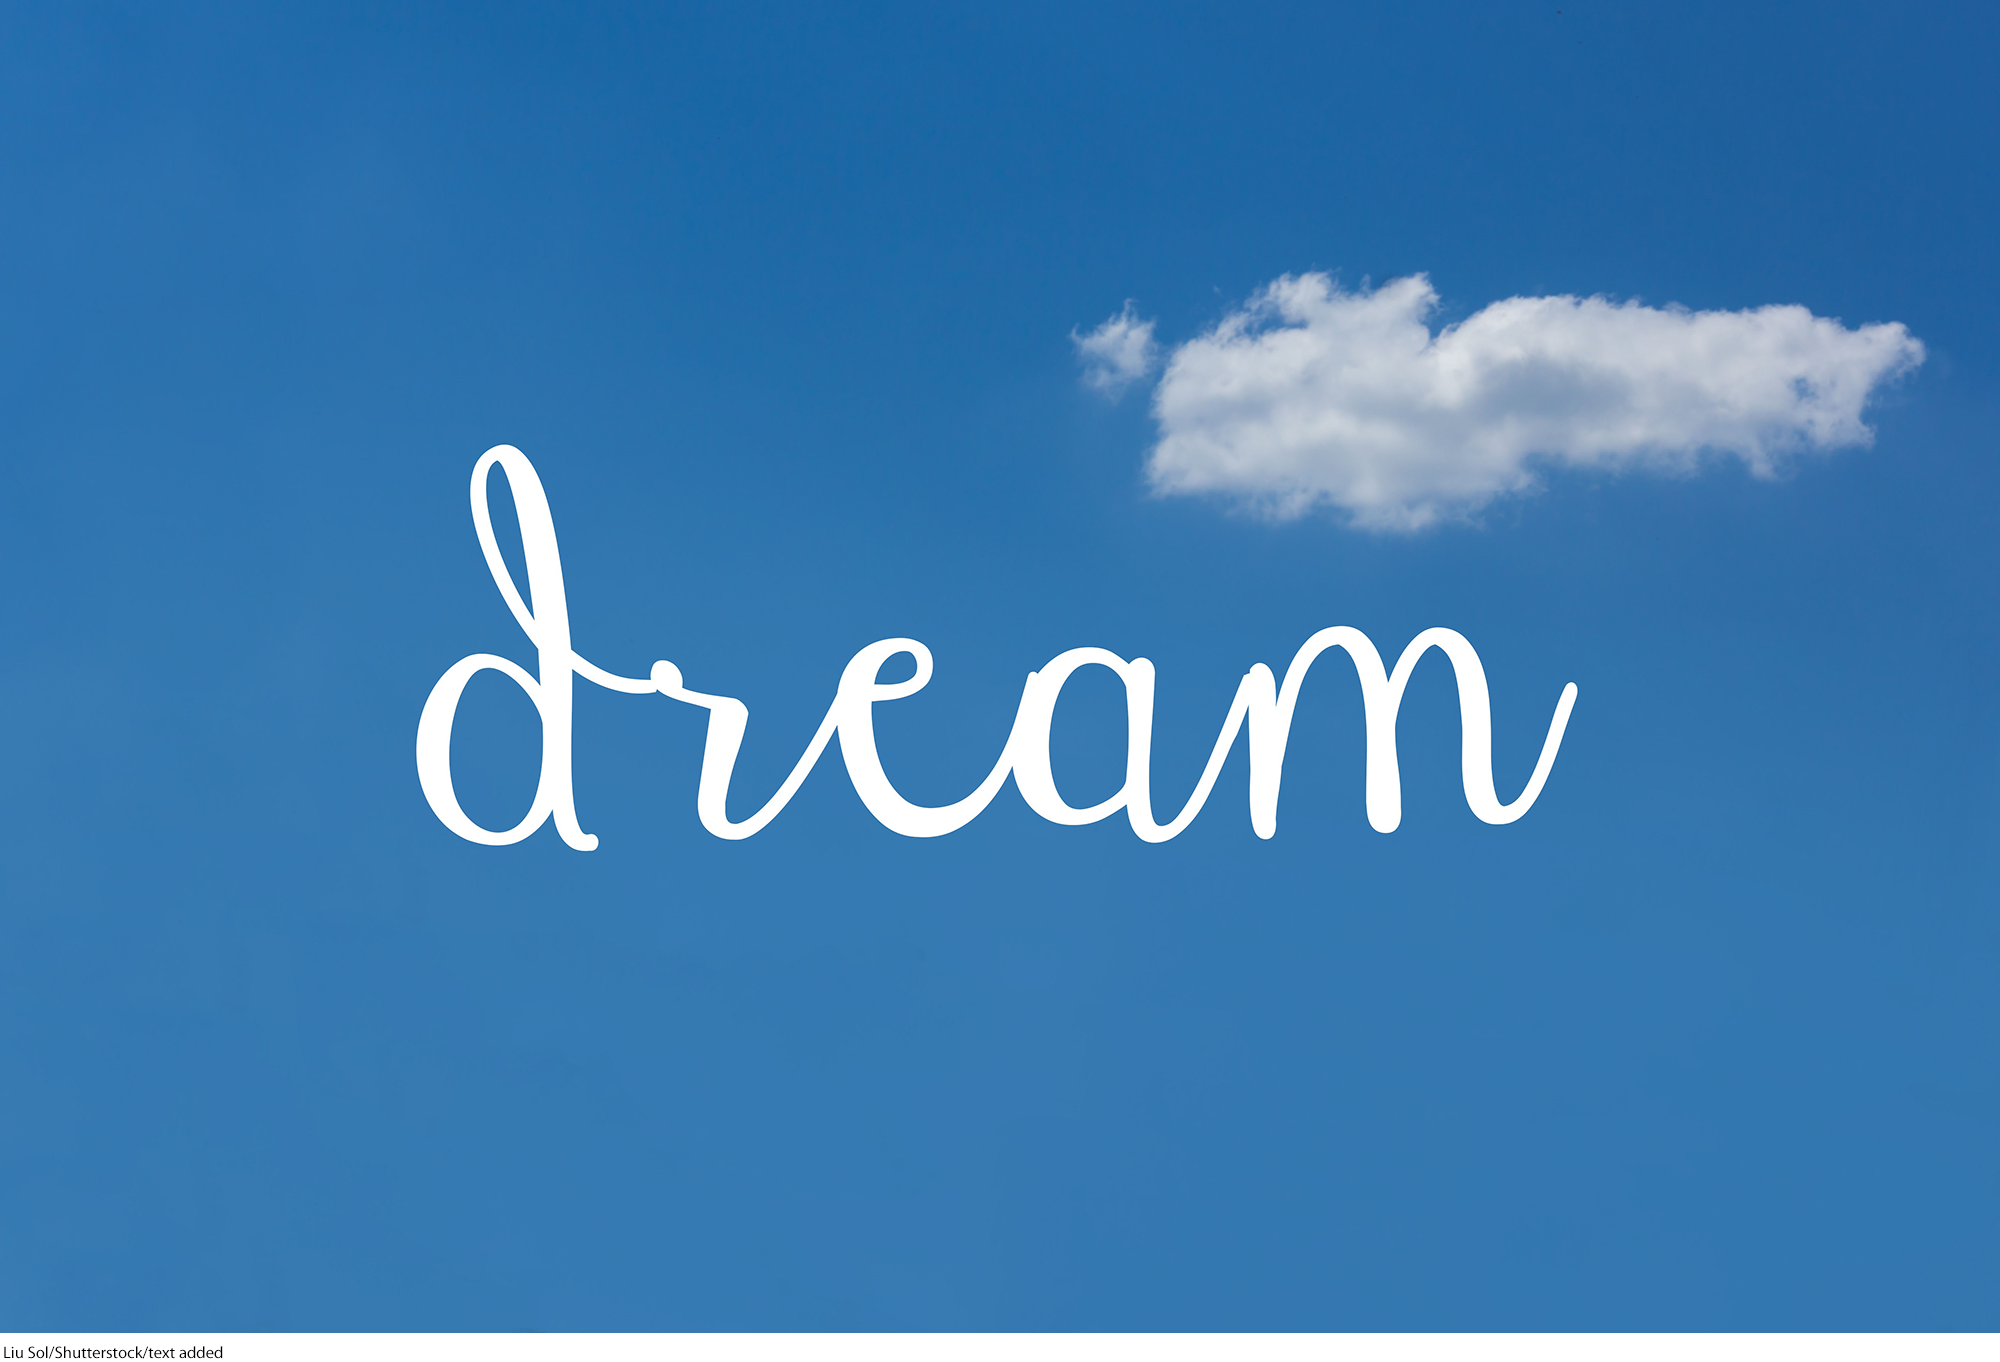 A photo shows a cloud in a blue sky with the word 'dream' written under it.